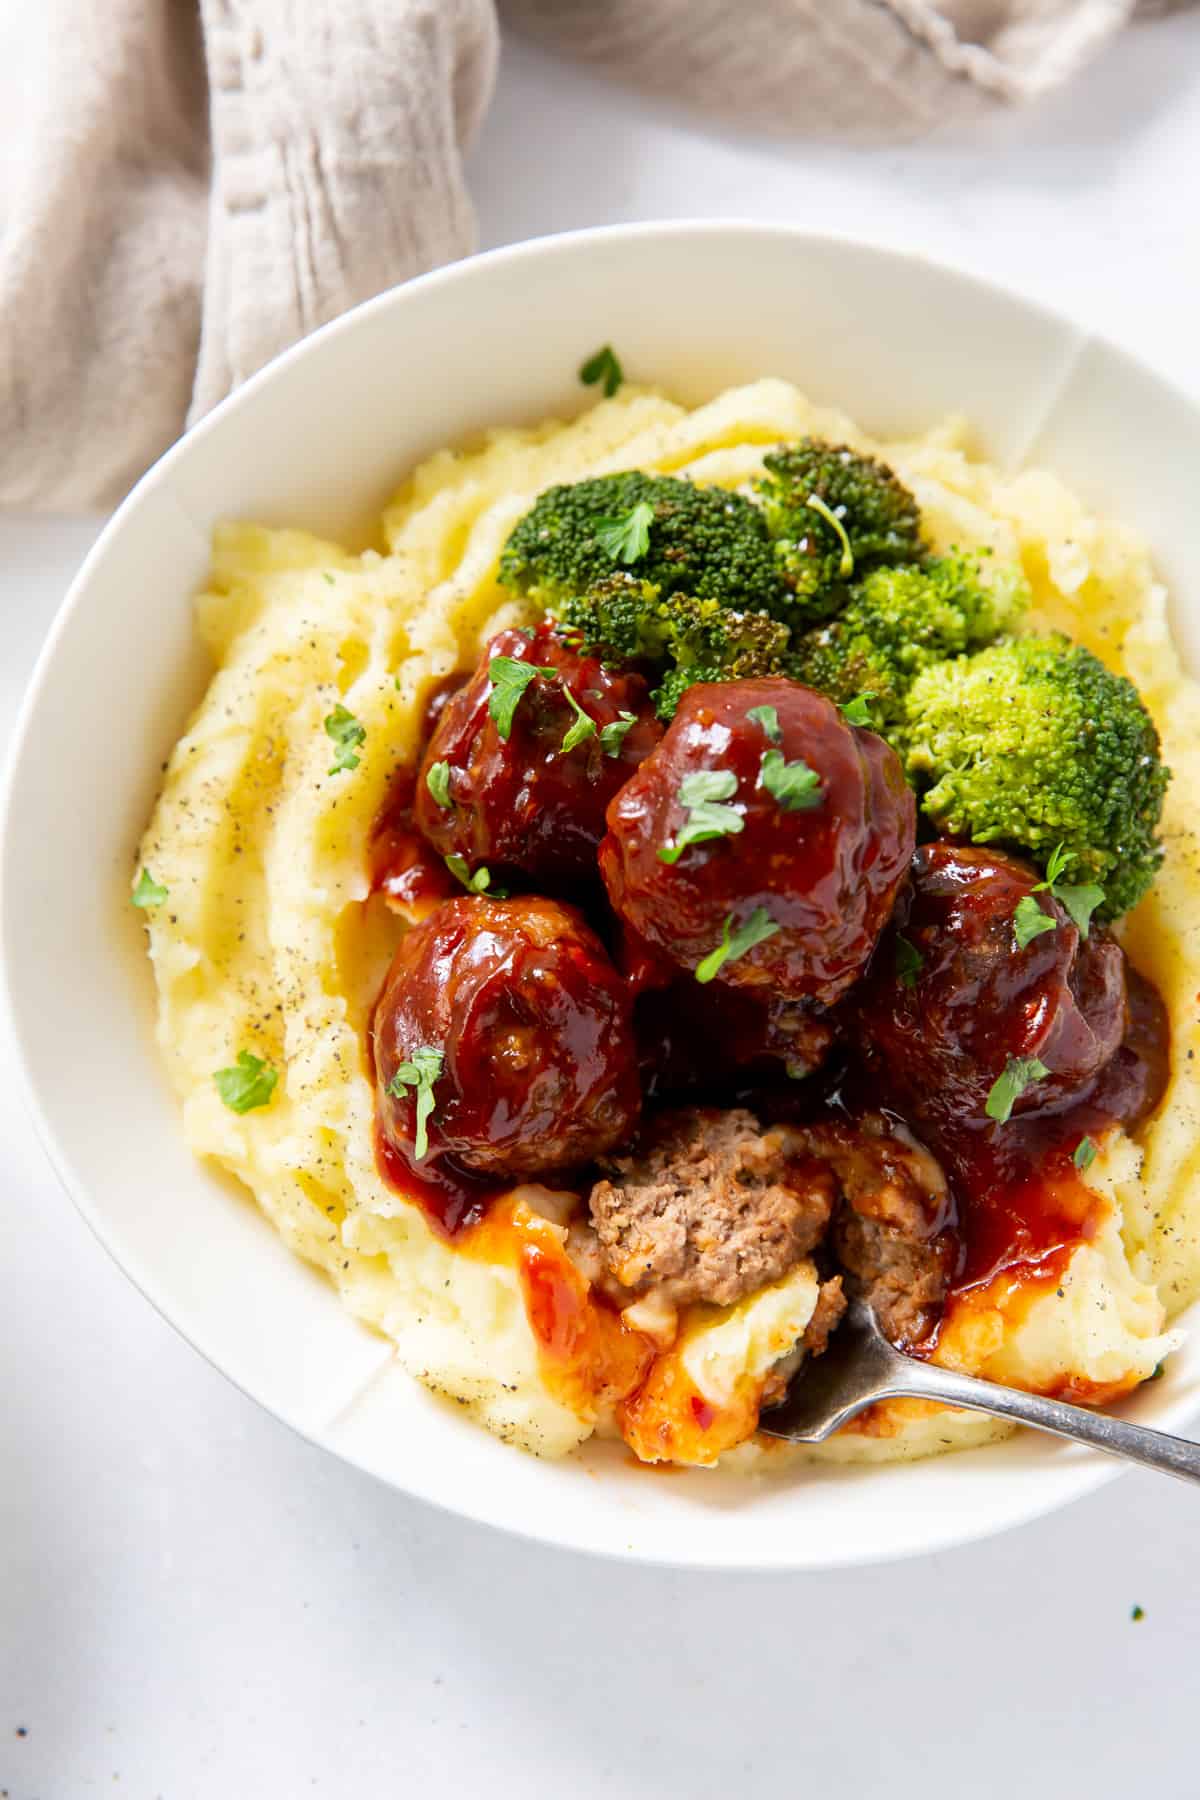 A fork breaking into a meatball in a bowl with mashed potatoes.